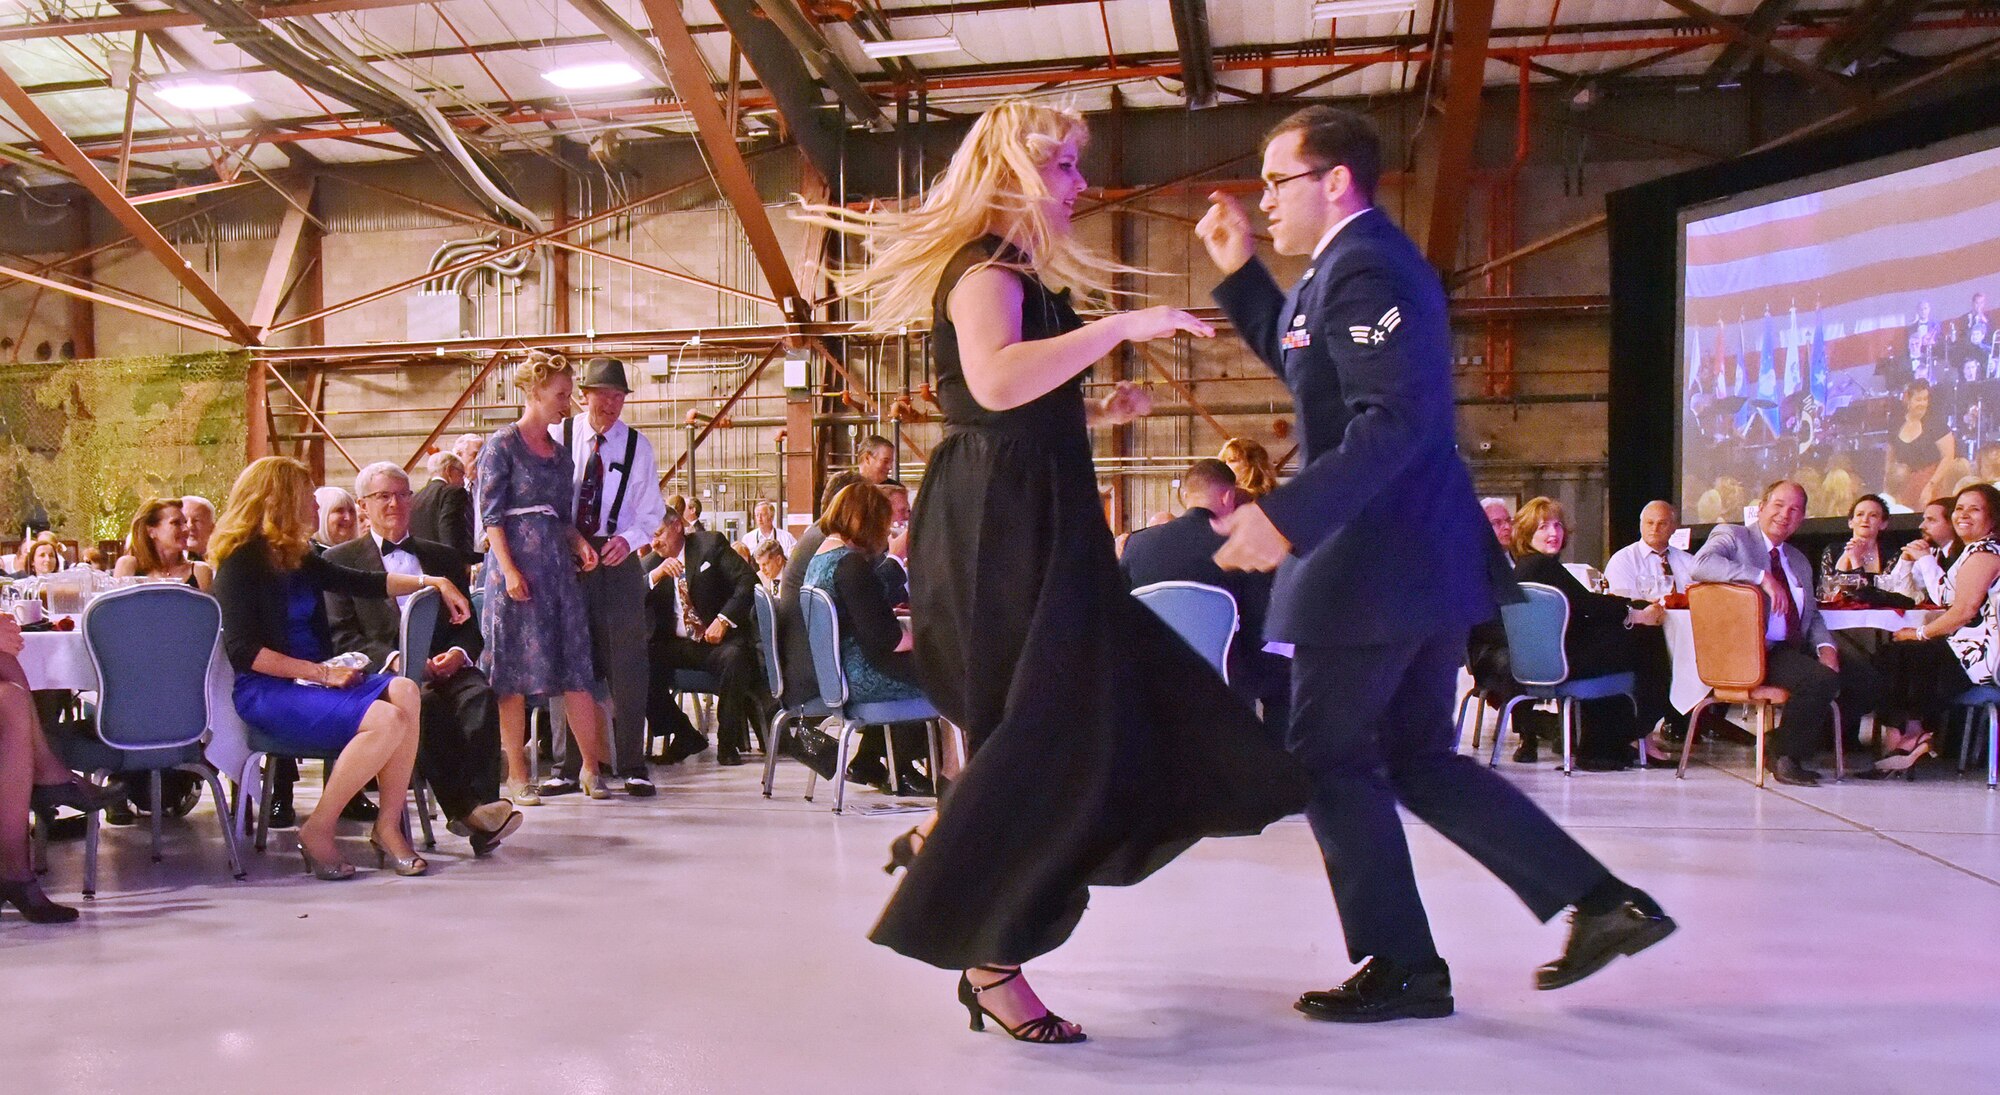 Senior Airman Jeffrey Whitlock and his partner dance the night away at an April 16 banquet celebrating Kirtland's 75th anniversary. About 500 people attended the banquet at the New Mexico Air National Guard’s 150th Special Operations Wing hangar. The banquet had a 1940s theme, to remember the opening of Albuquerque Army Air Base on Jan. 7, 1941. Period attire and static displays of World War II vehicles helped bring the theme to life. (Photo by Ken Moore)